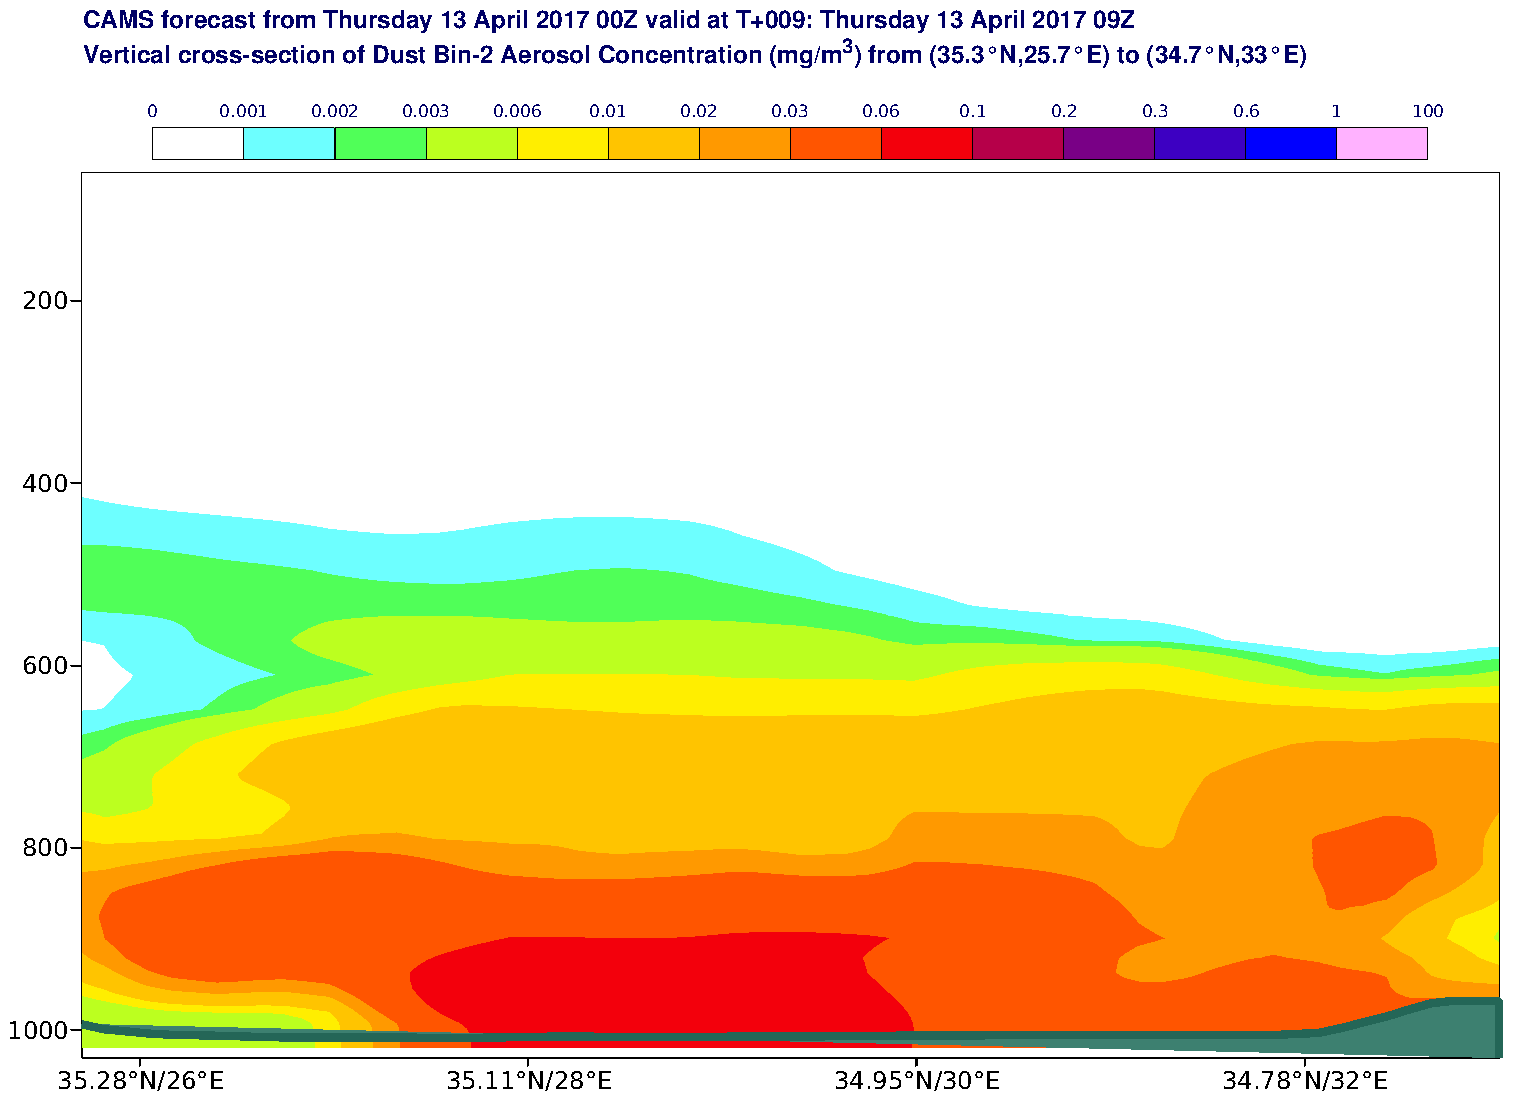 Vertical cross-section of Dust Bin-2 Aerosol Concentration (mg/m3) valid at T9 - 2017-04-13 09:00